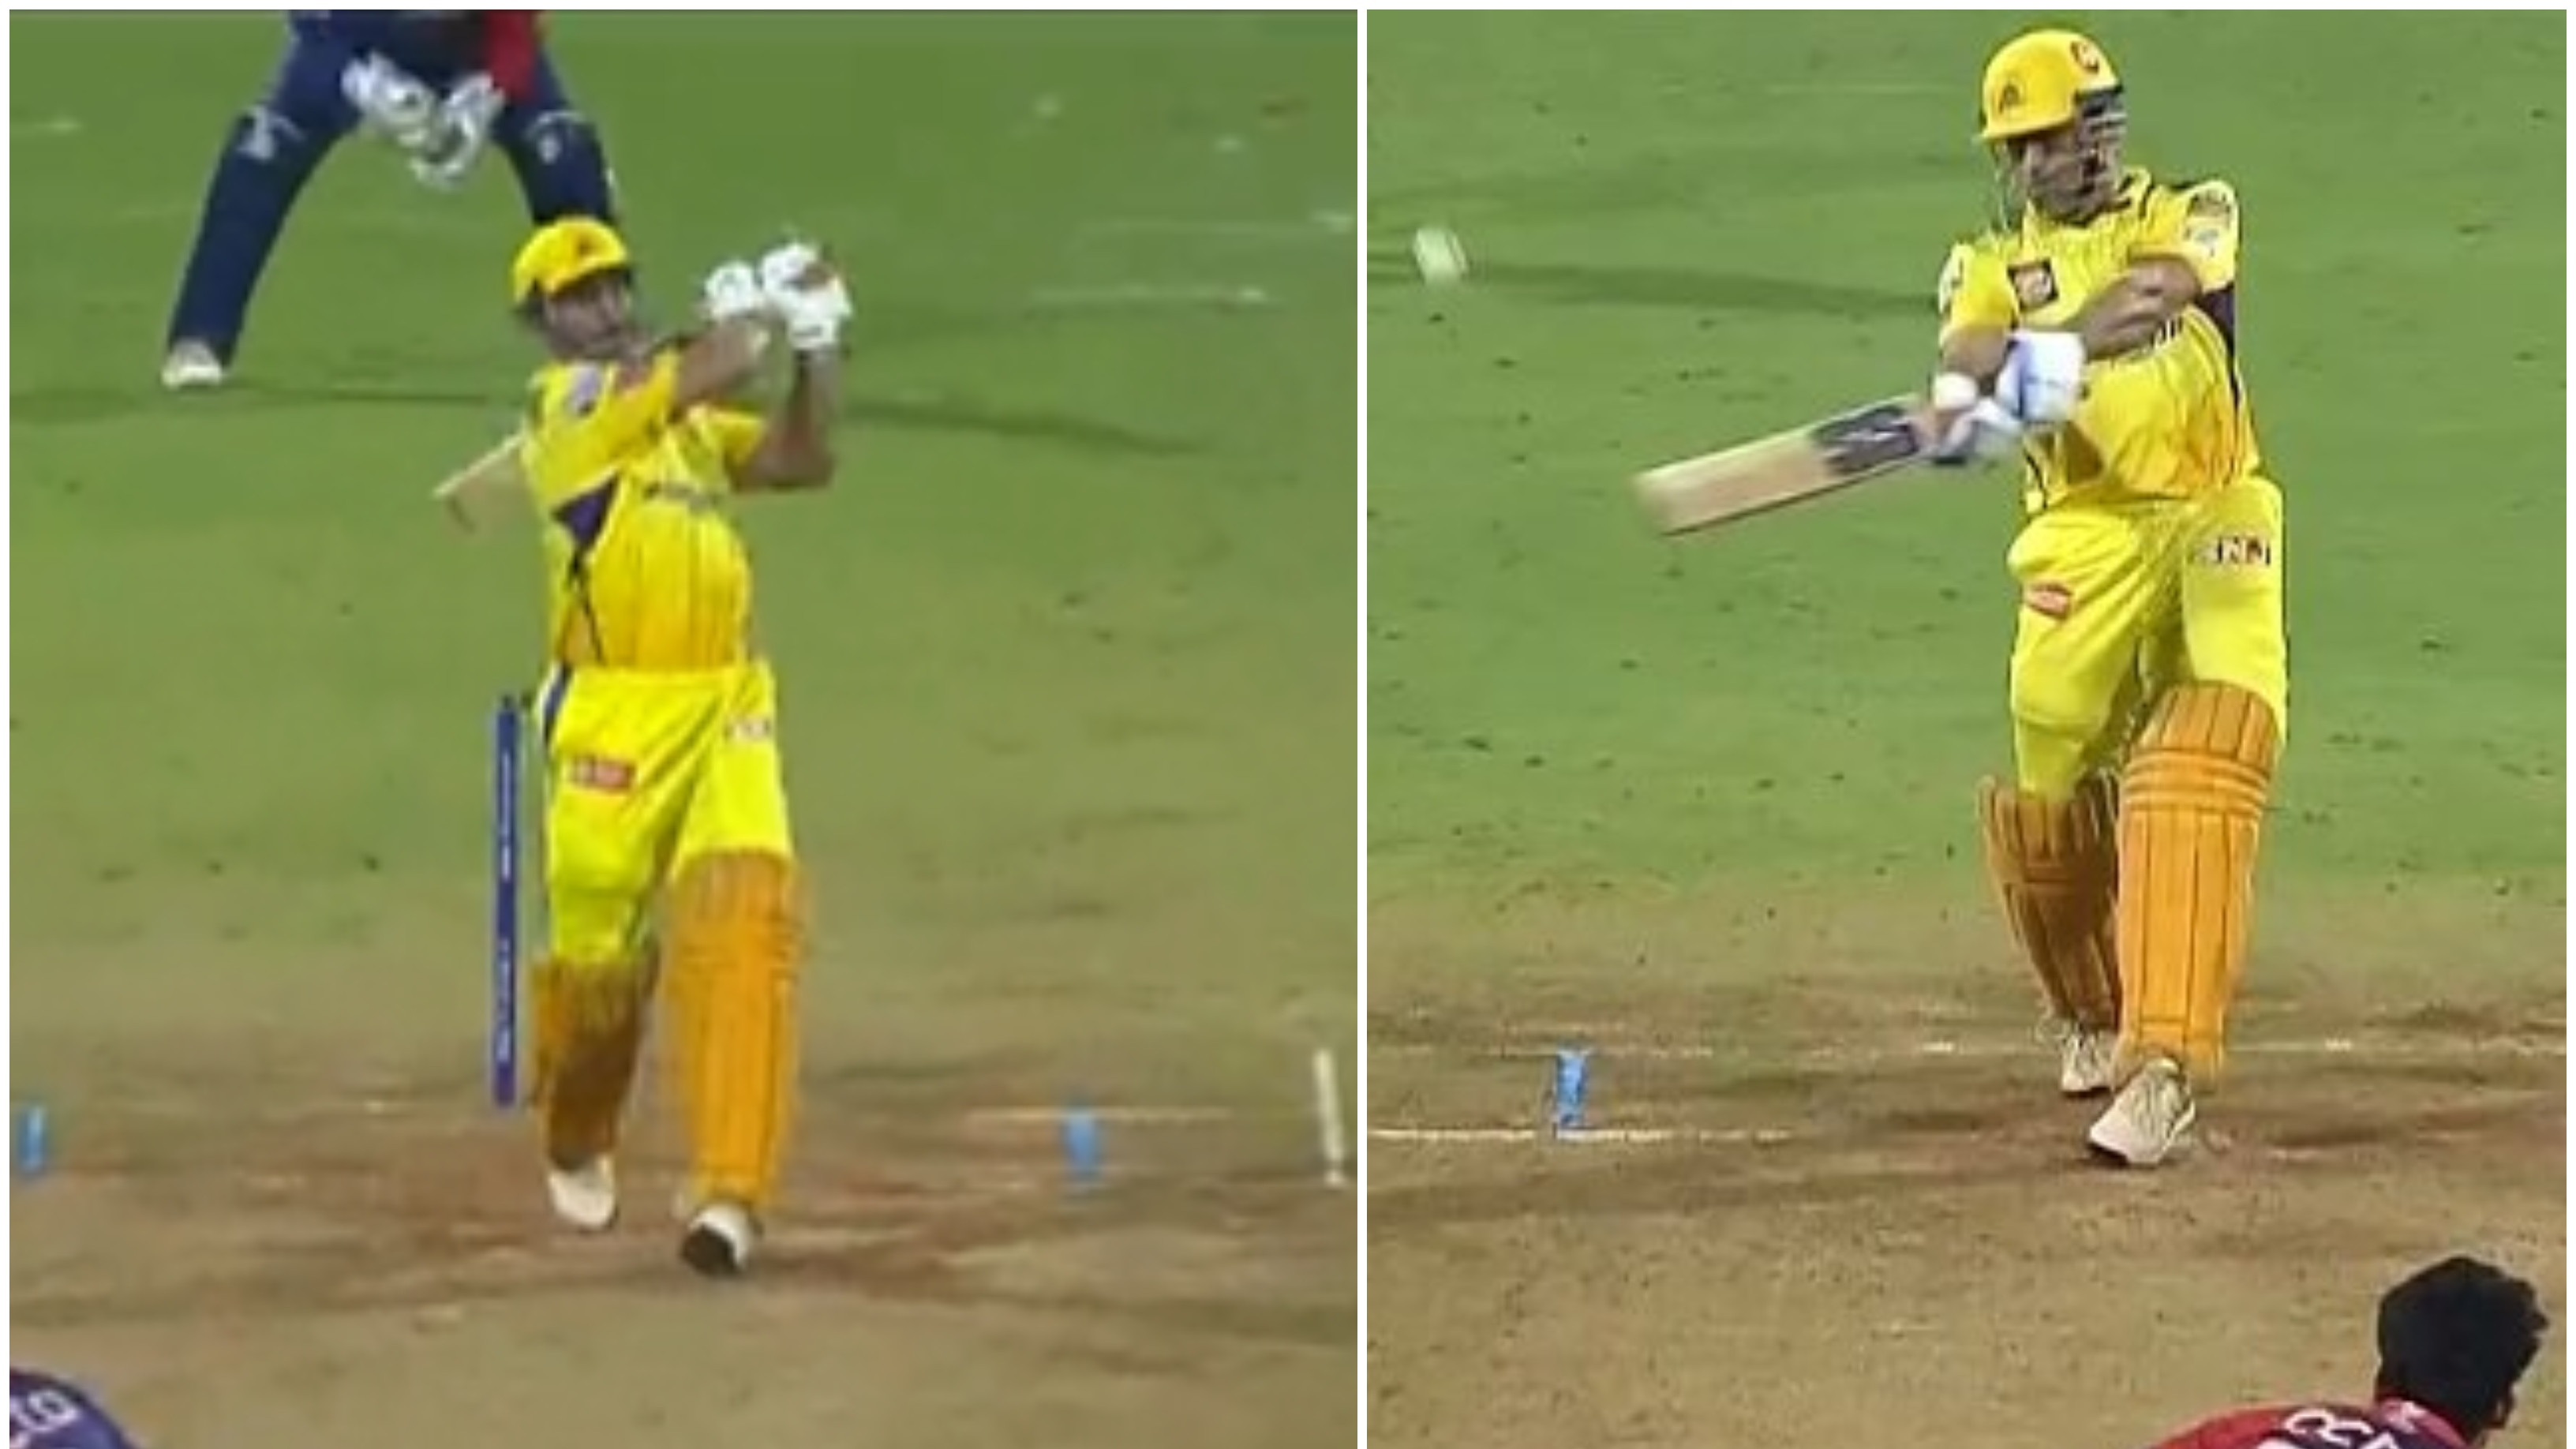 IPL 2022: WATCH – MS Dhoni slams two spectacular sixes during his dazzling cameo against DC